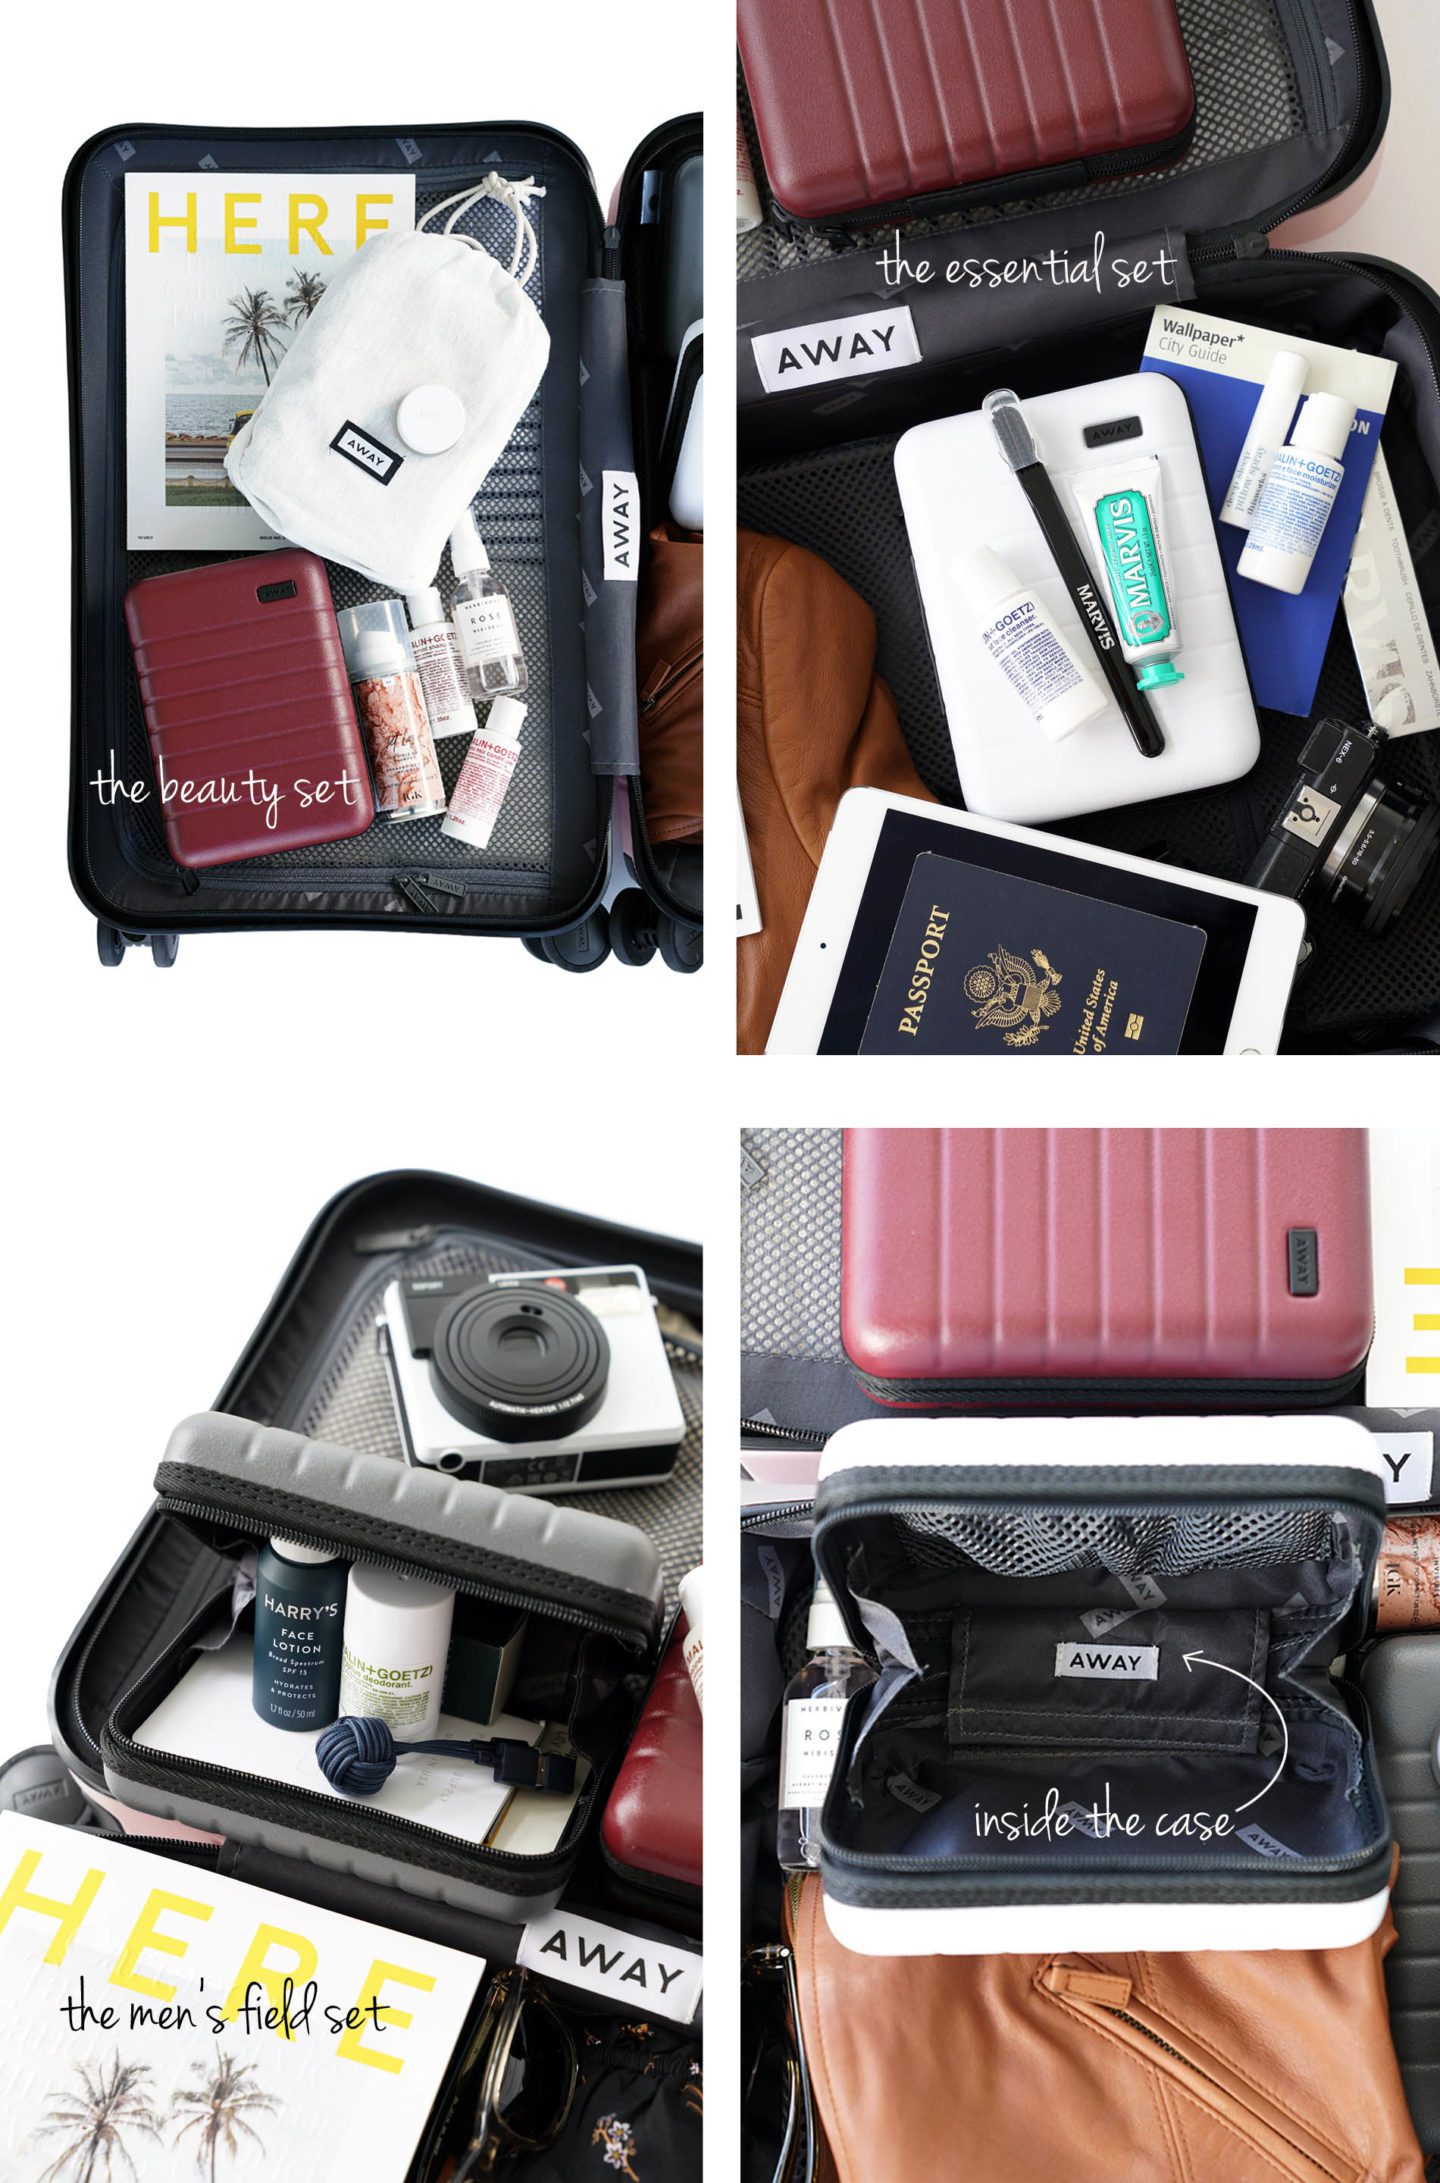 Away Holiday Gift Sets Mini Suitcases